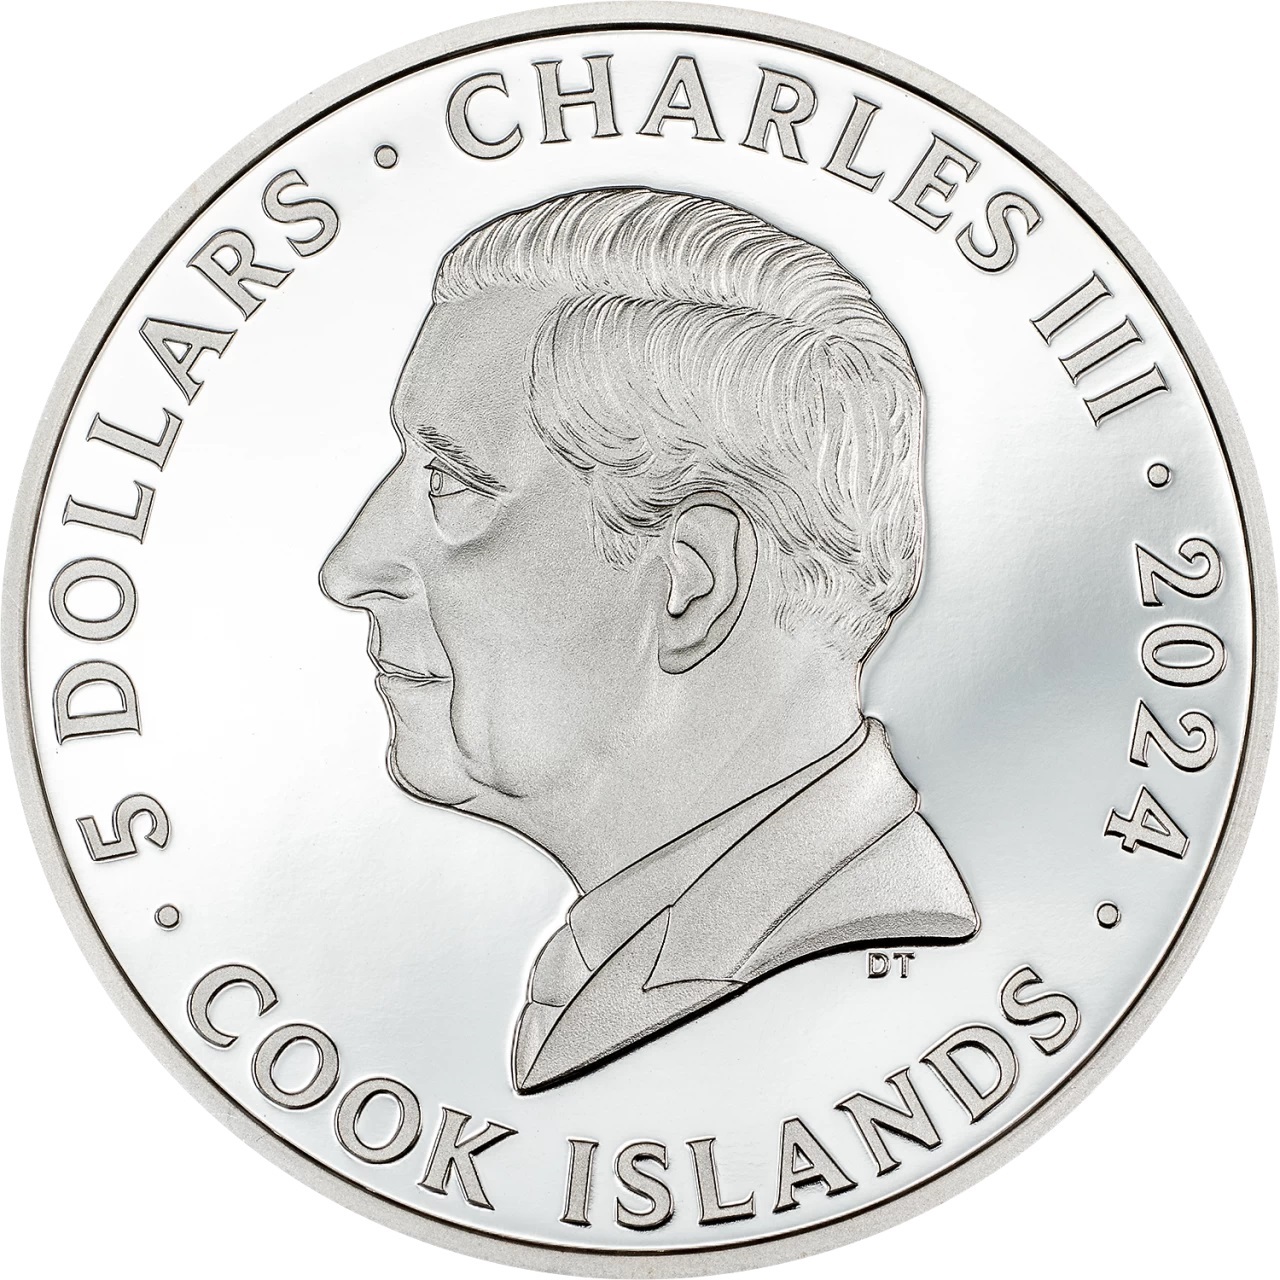 (W099.5.D.2024.30677) Cook Islands 5 Dollars Killers, Iron Maiden 2024 - Proof silver Obverse (zoom)